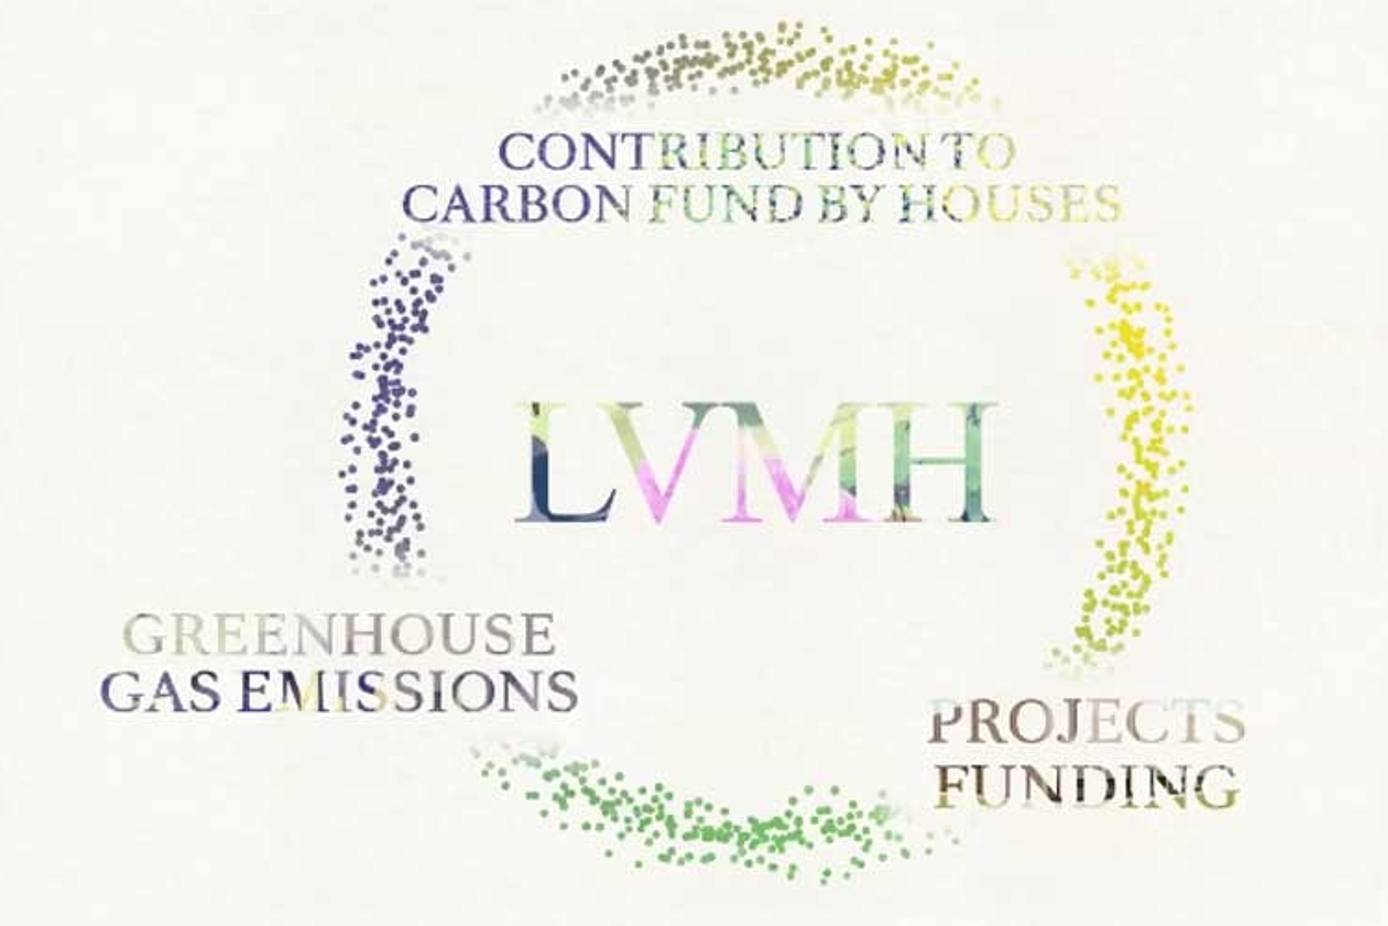 One year on: the LVMH internal carbon fund